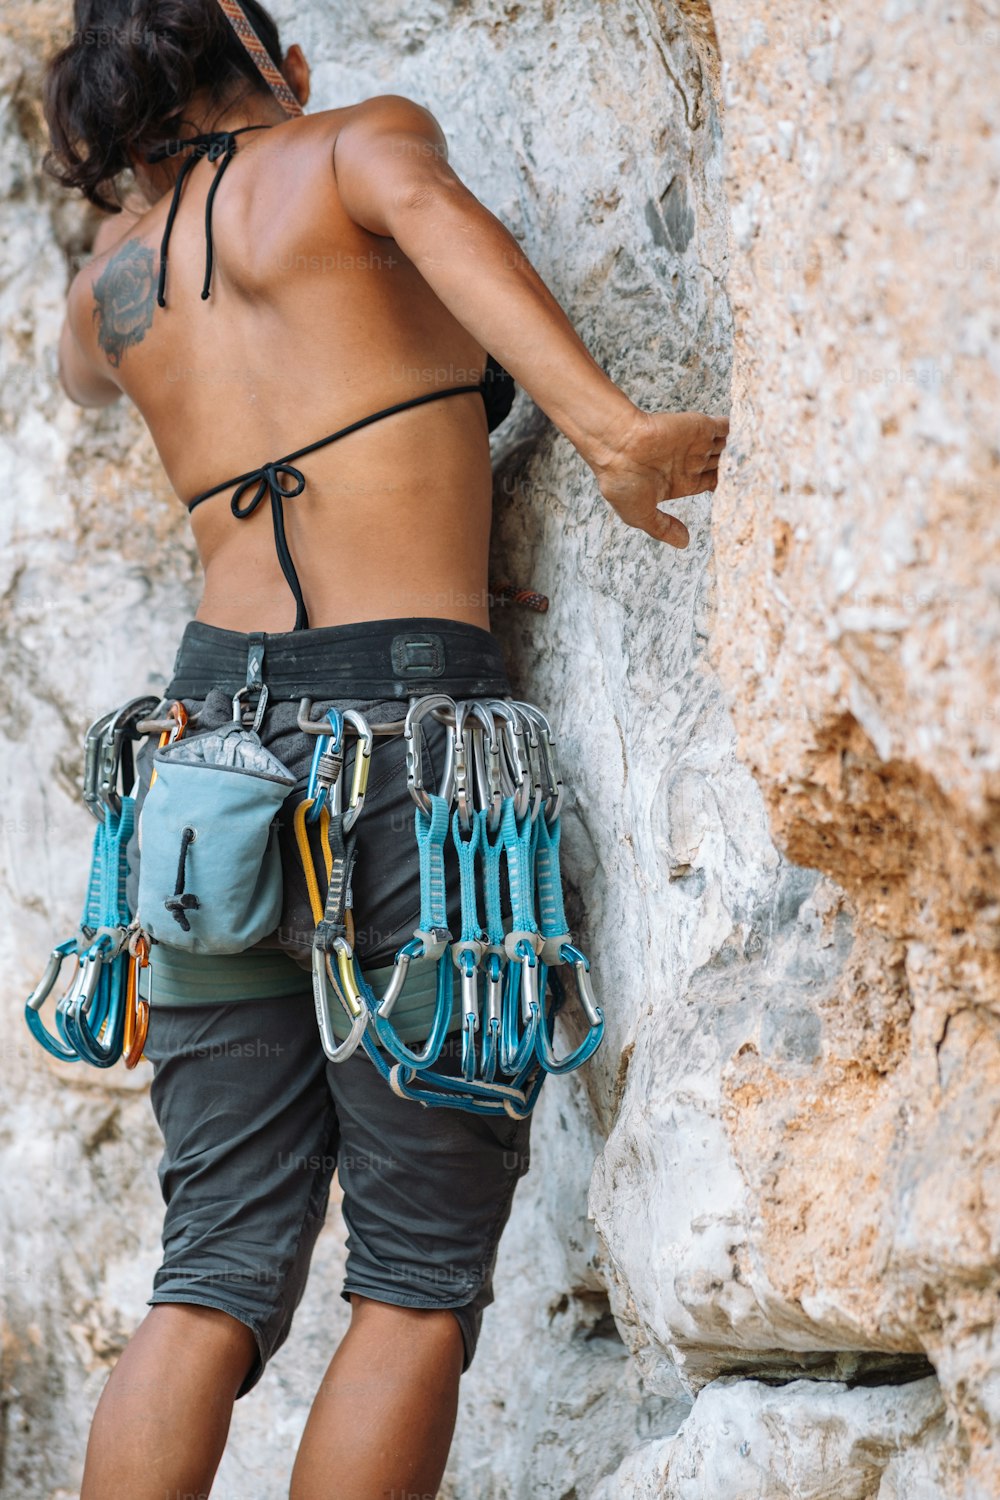 A woman climbing up the side of a rock photo – Deportes Image on